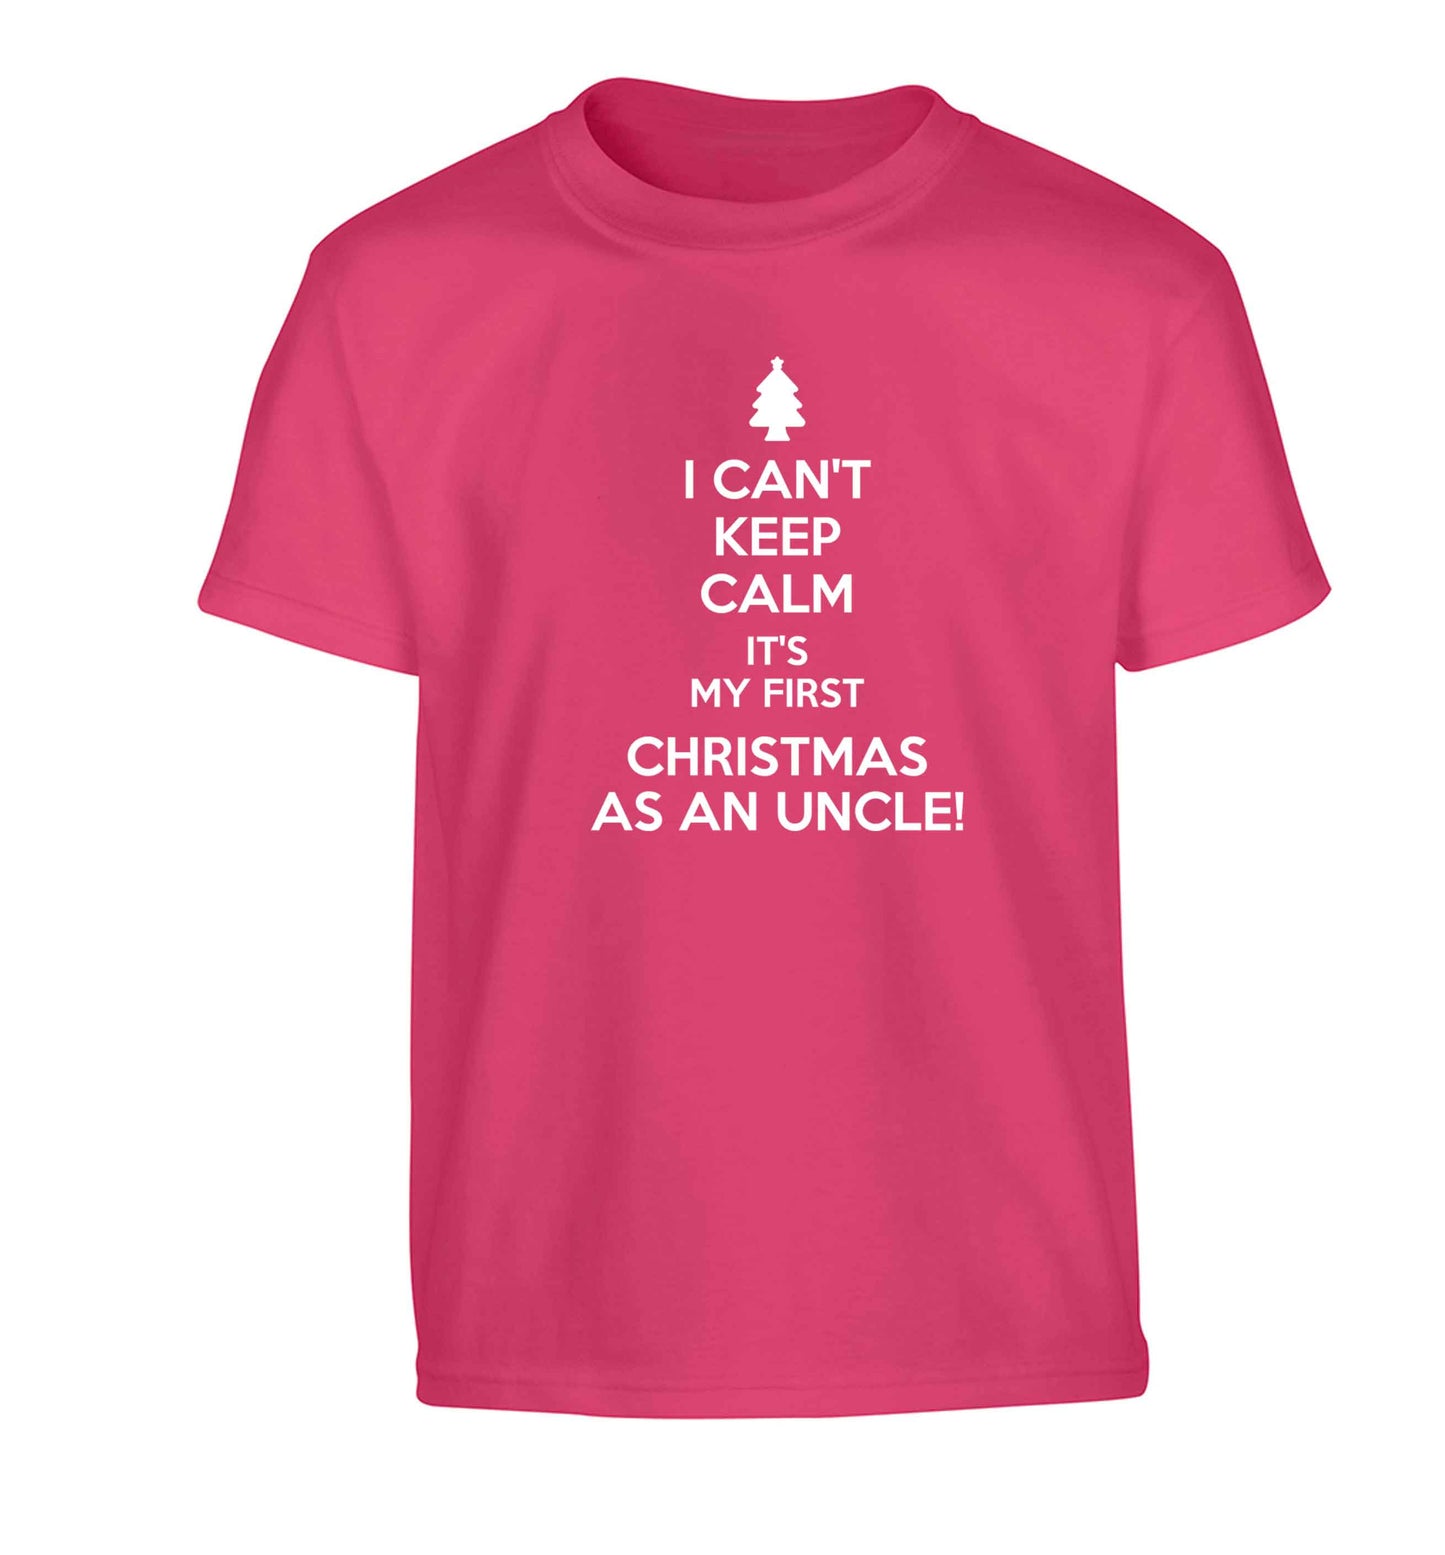 I can't keep calm it's my first Christmas as an uncle! Children's pink Tshirt 12-13 Years